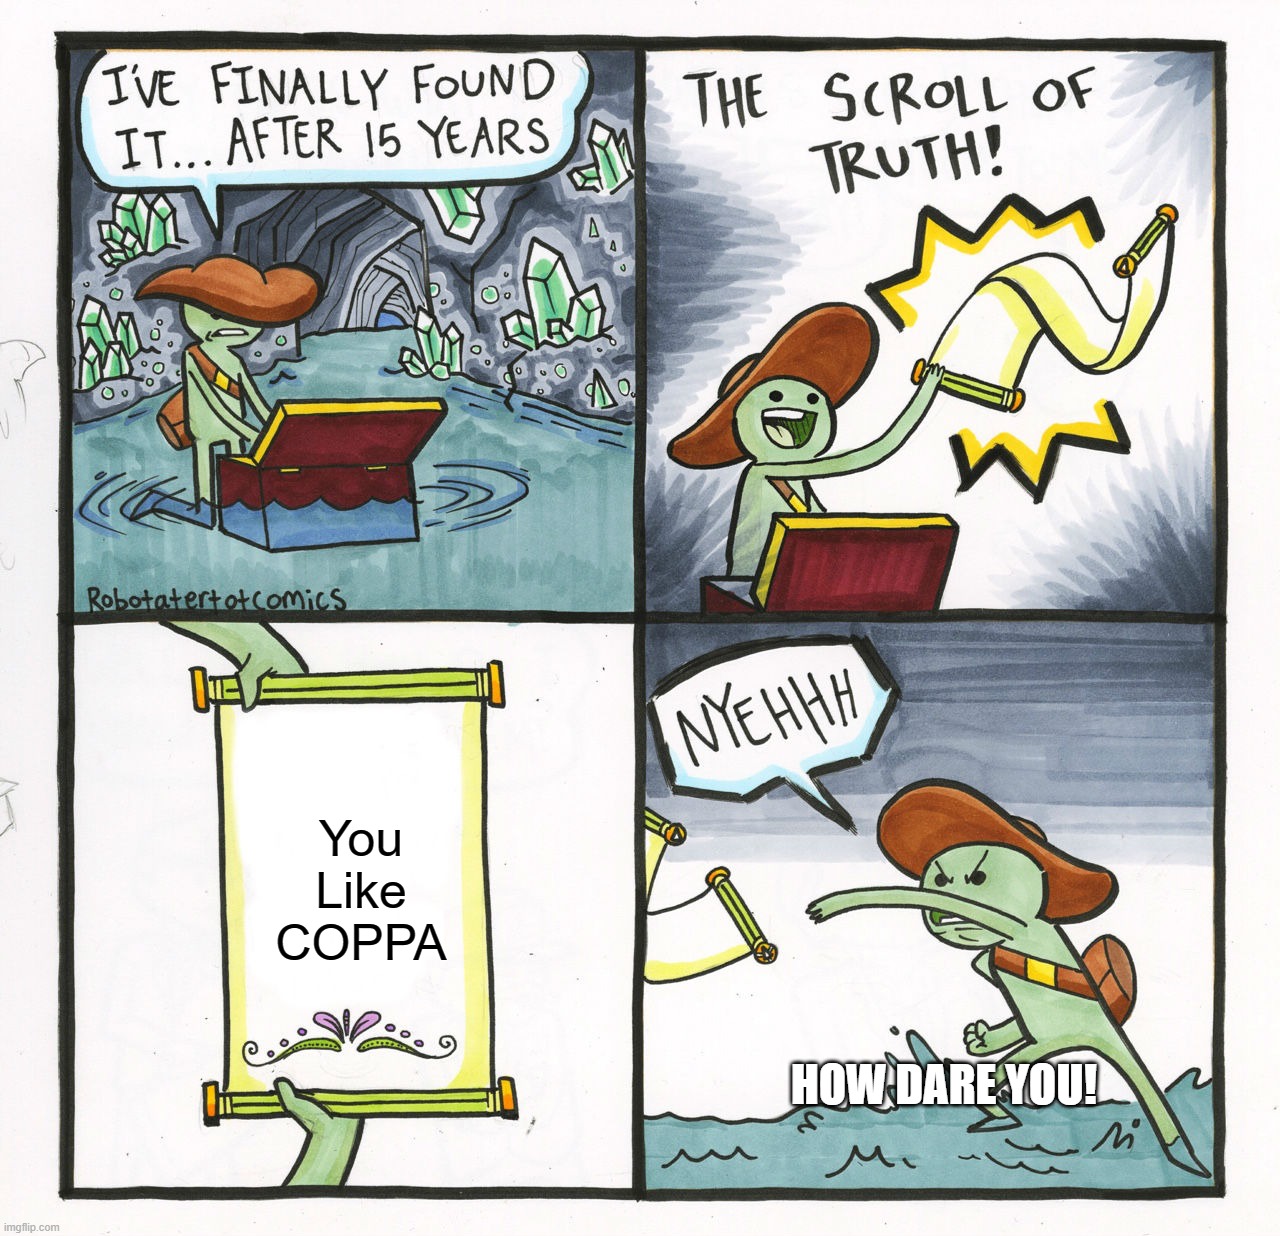 No one likes COPPA | You Like COPPA; HOW DARE YOU! | image tagged in memes,the scroll of truth,funny | made w/ Imgflip meme maker